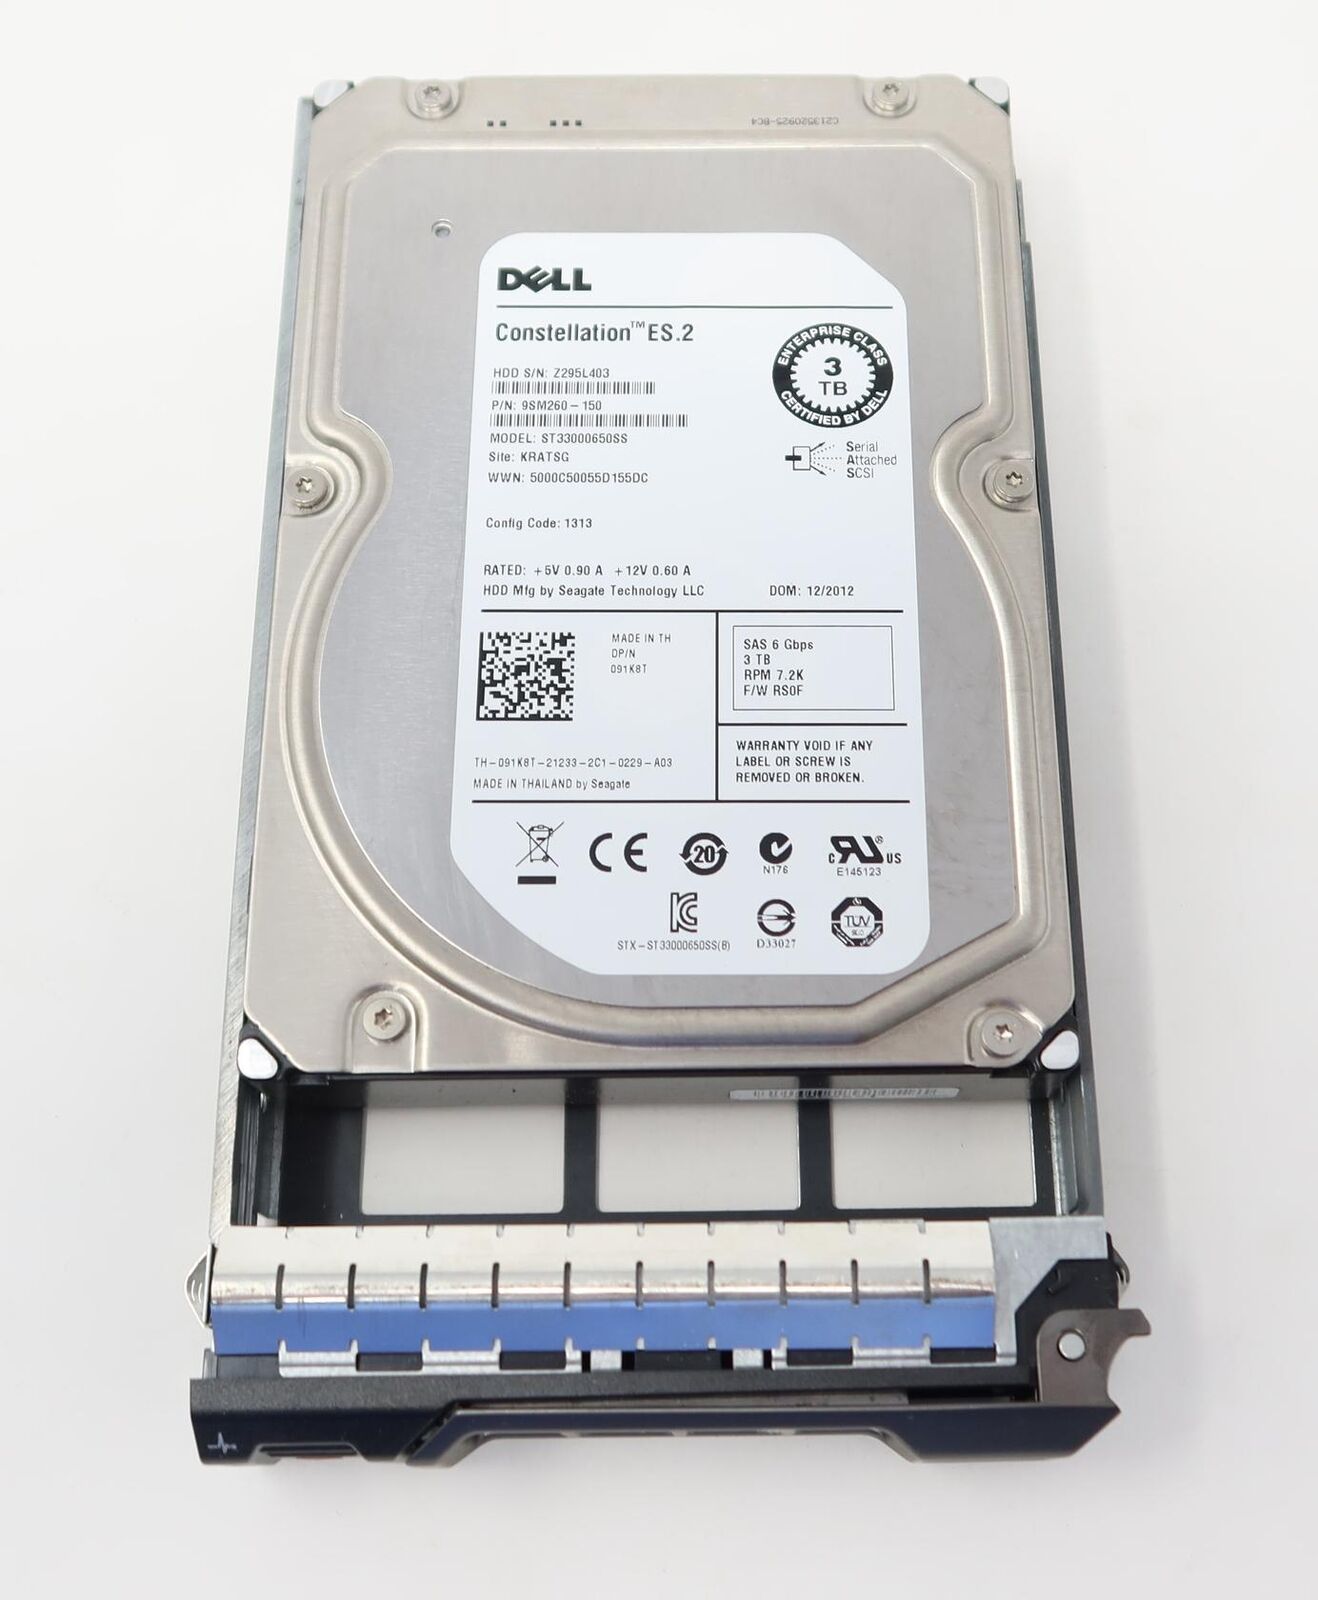 91K8T Dell Constellation 3Tb 7200rpm 6Gbps 3.5 SAS ST33000650SS